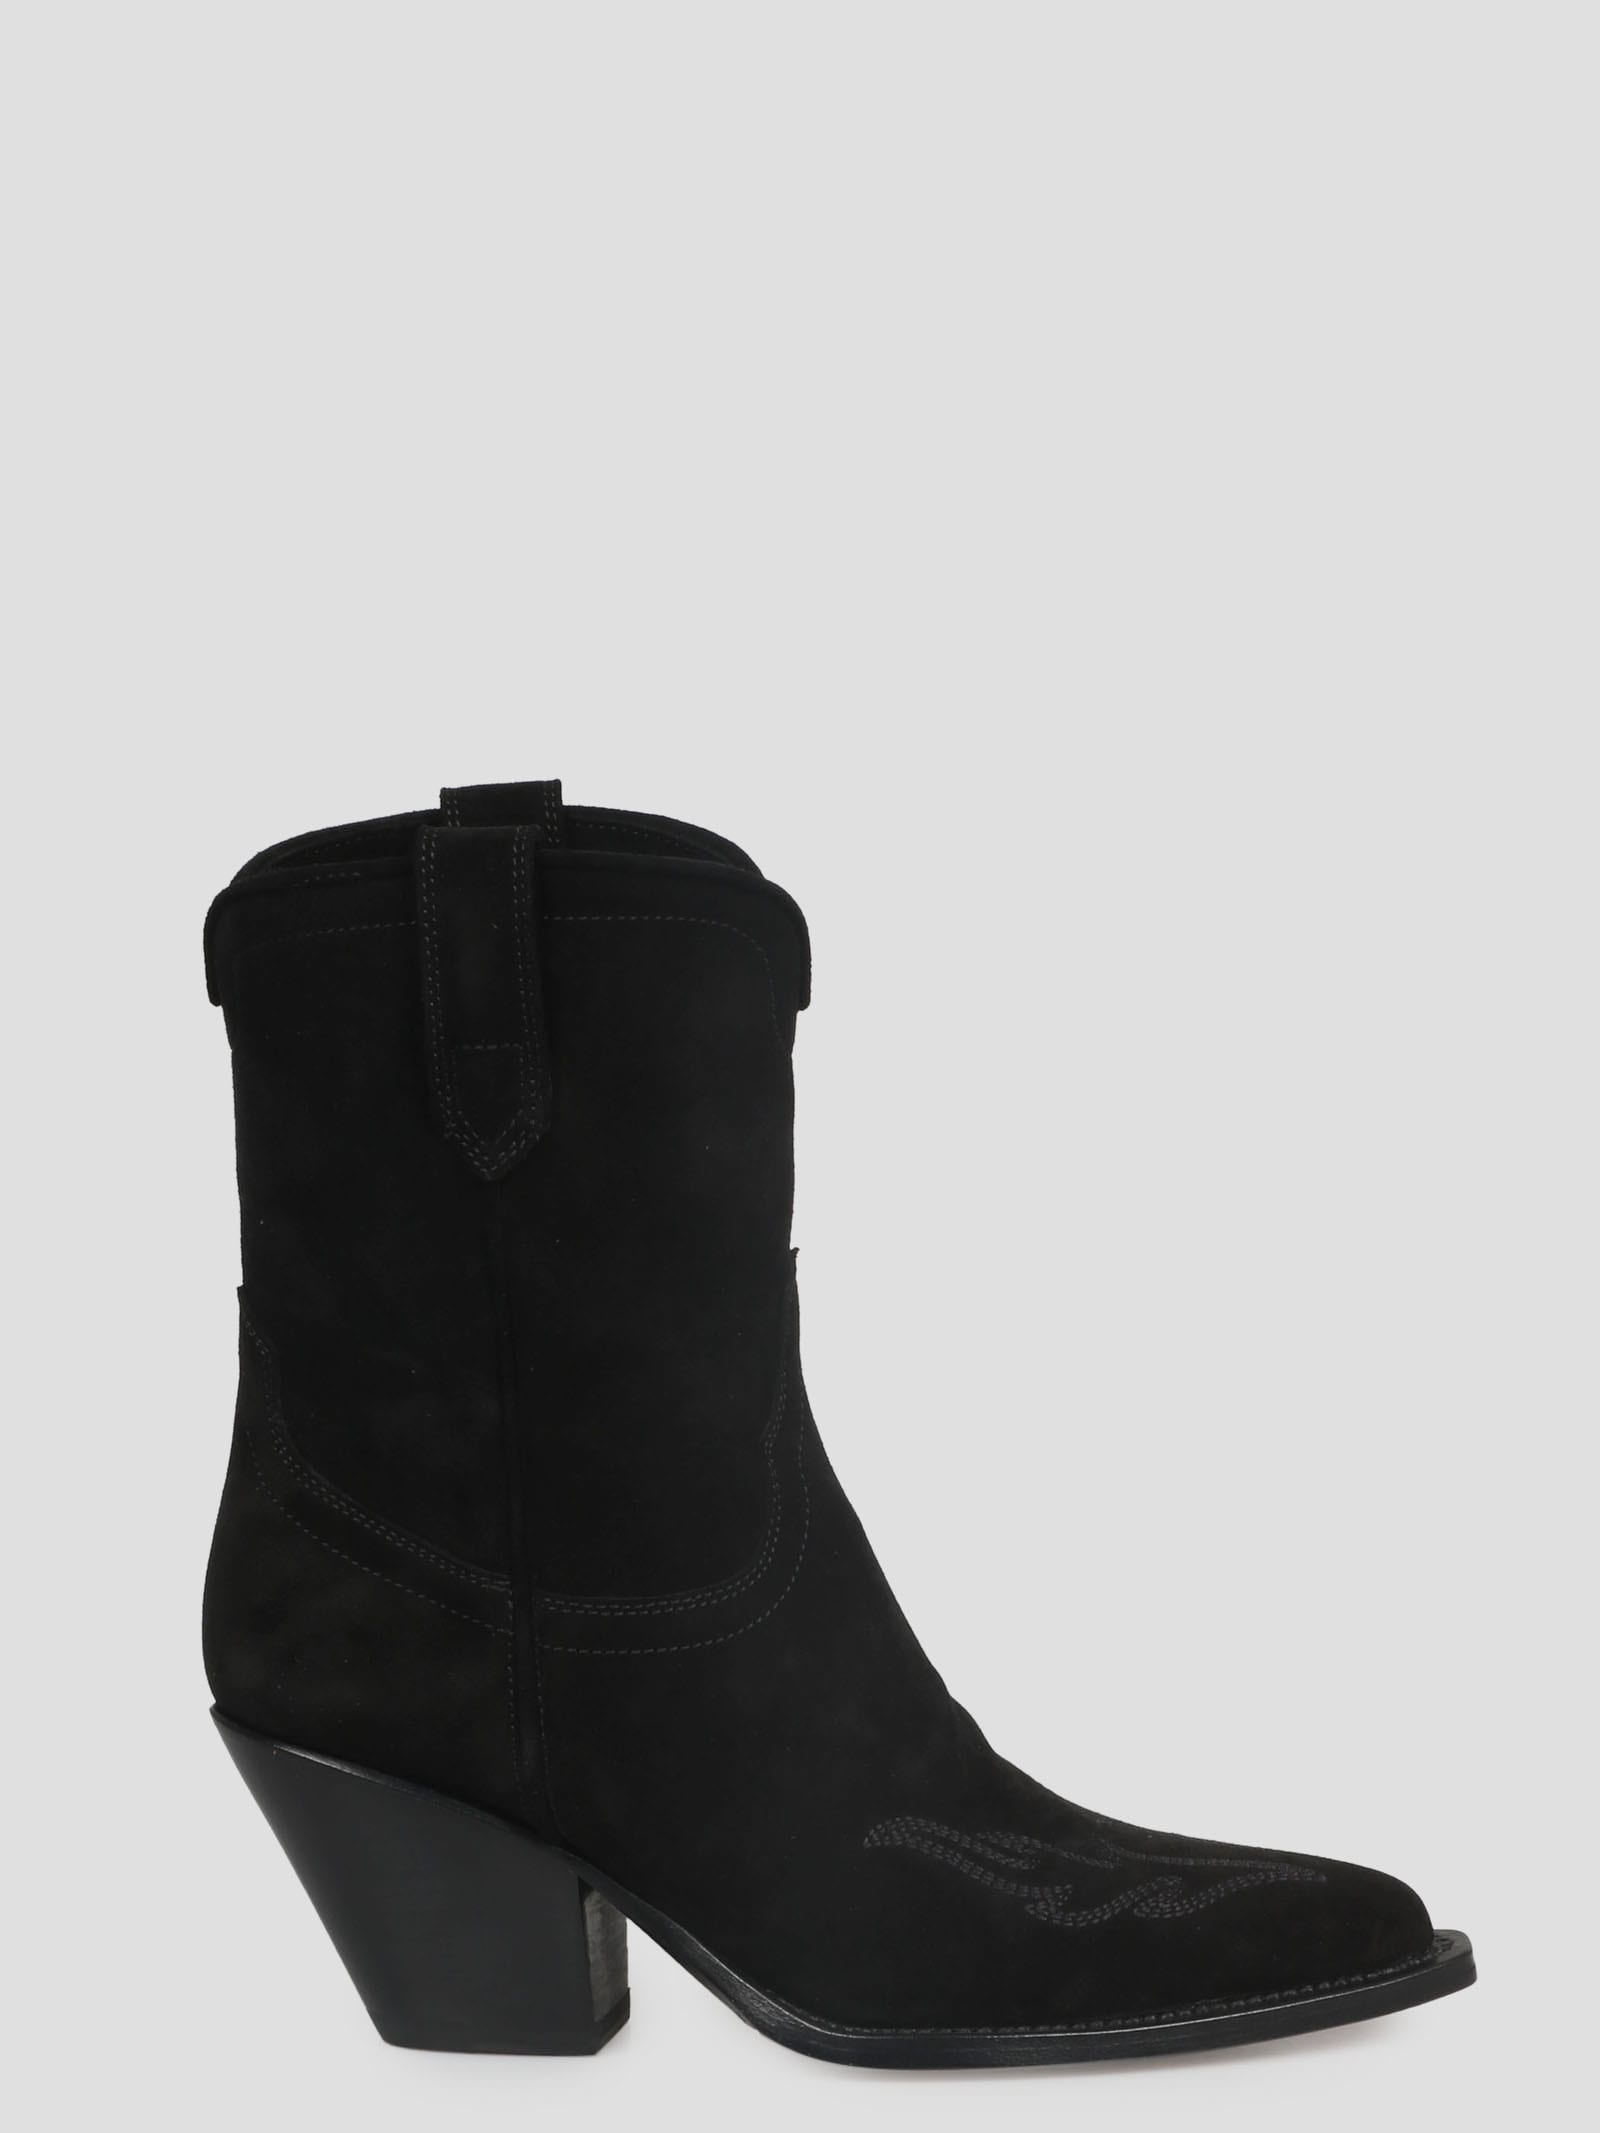 Sonora Perla Ankle Boots